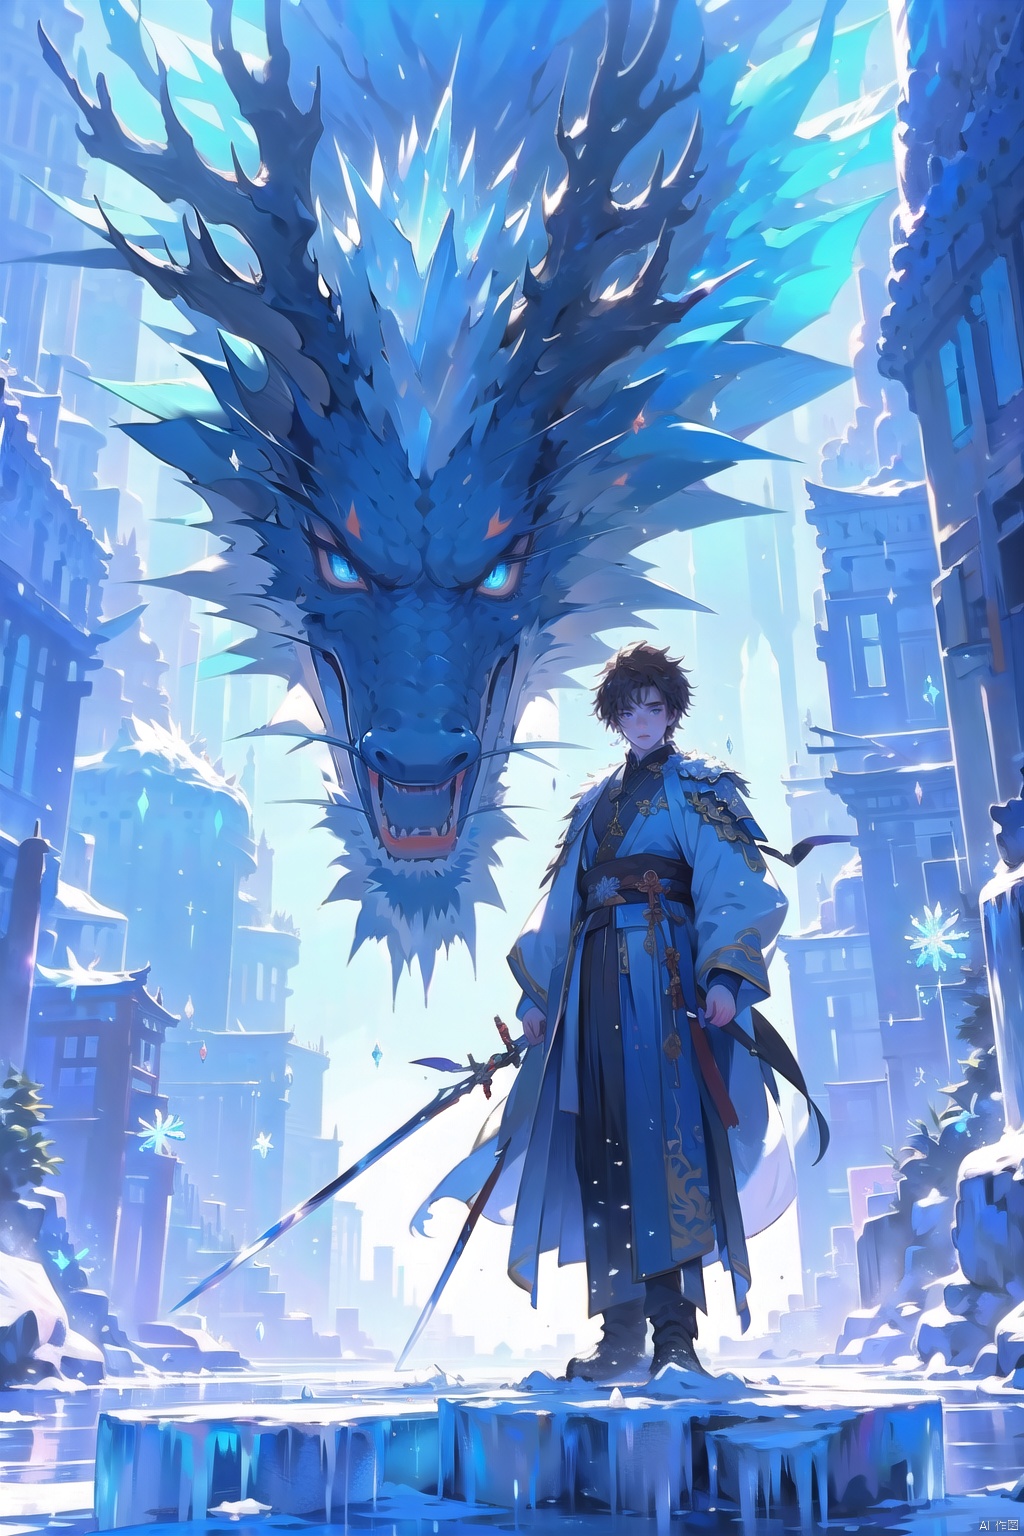  ice magic,(1boy:1.5),1boy, solo,full body,front
,brown hair,handsome, white skin,holding sword,sword,blue theme, holding, holding sword, holding weapon, ice,Ice Magic,Ice crystal,Icicles,ice,Chinese Ice Dragon,short hair,whole body,solo, standing, sword, weaponFacial detail portrayal,Perfect facial features,standing,watch audience,